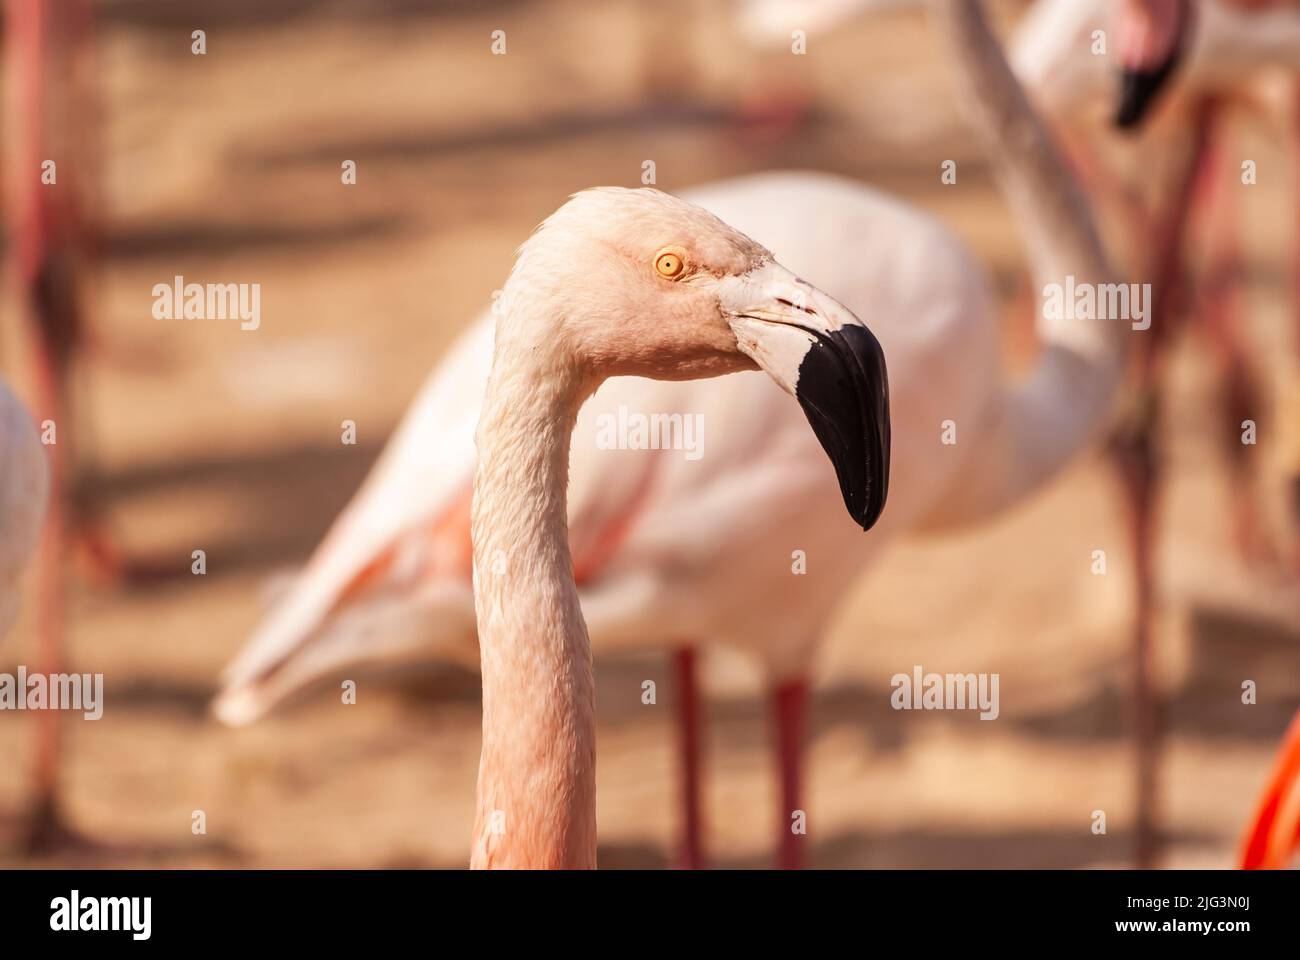 Flamingos at Sigean Park in Occitanie, France Stock Photo